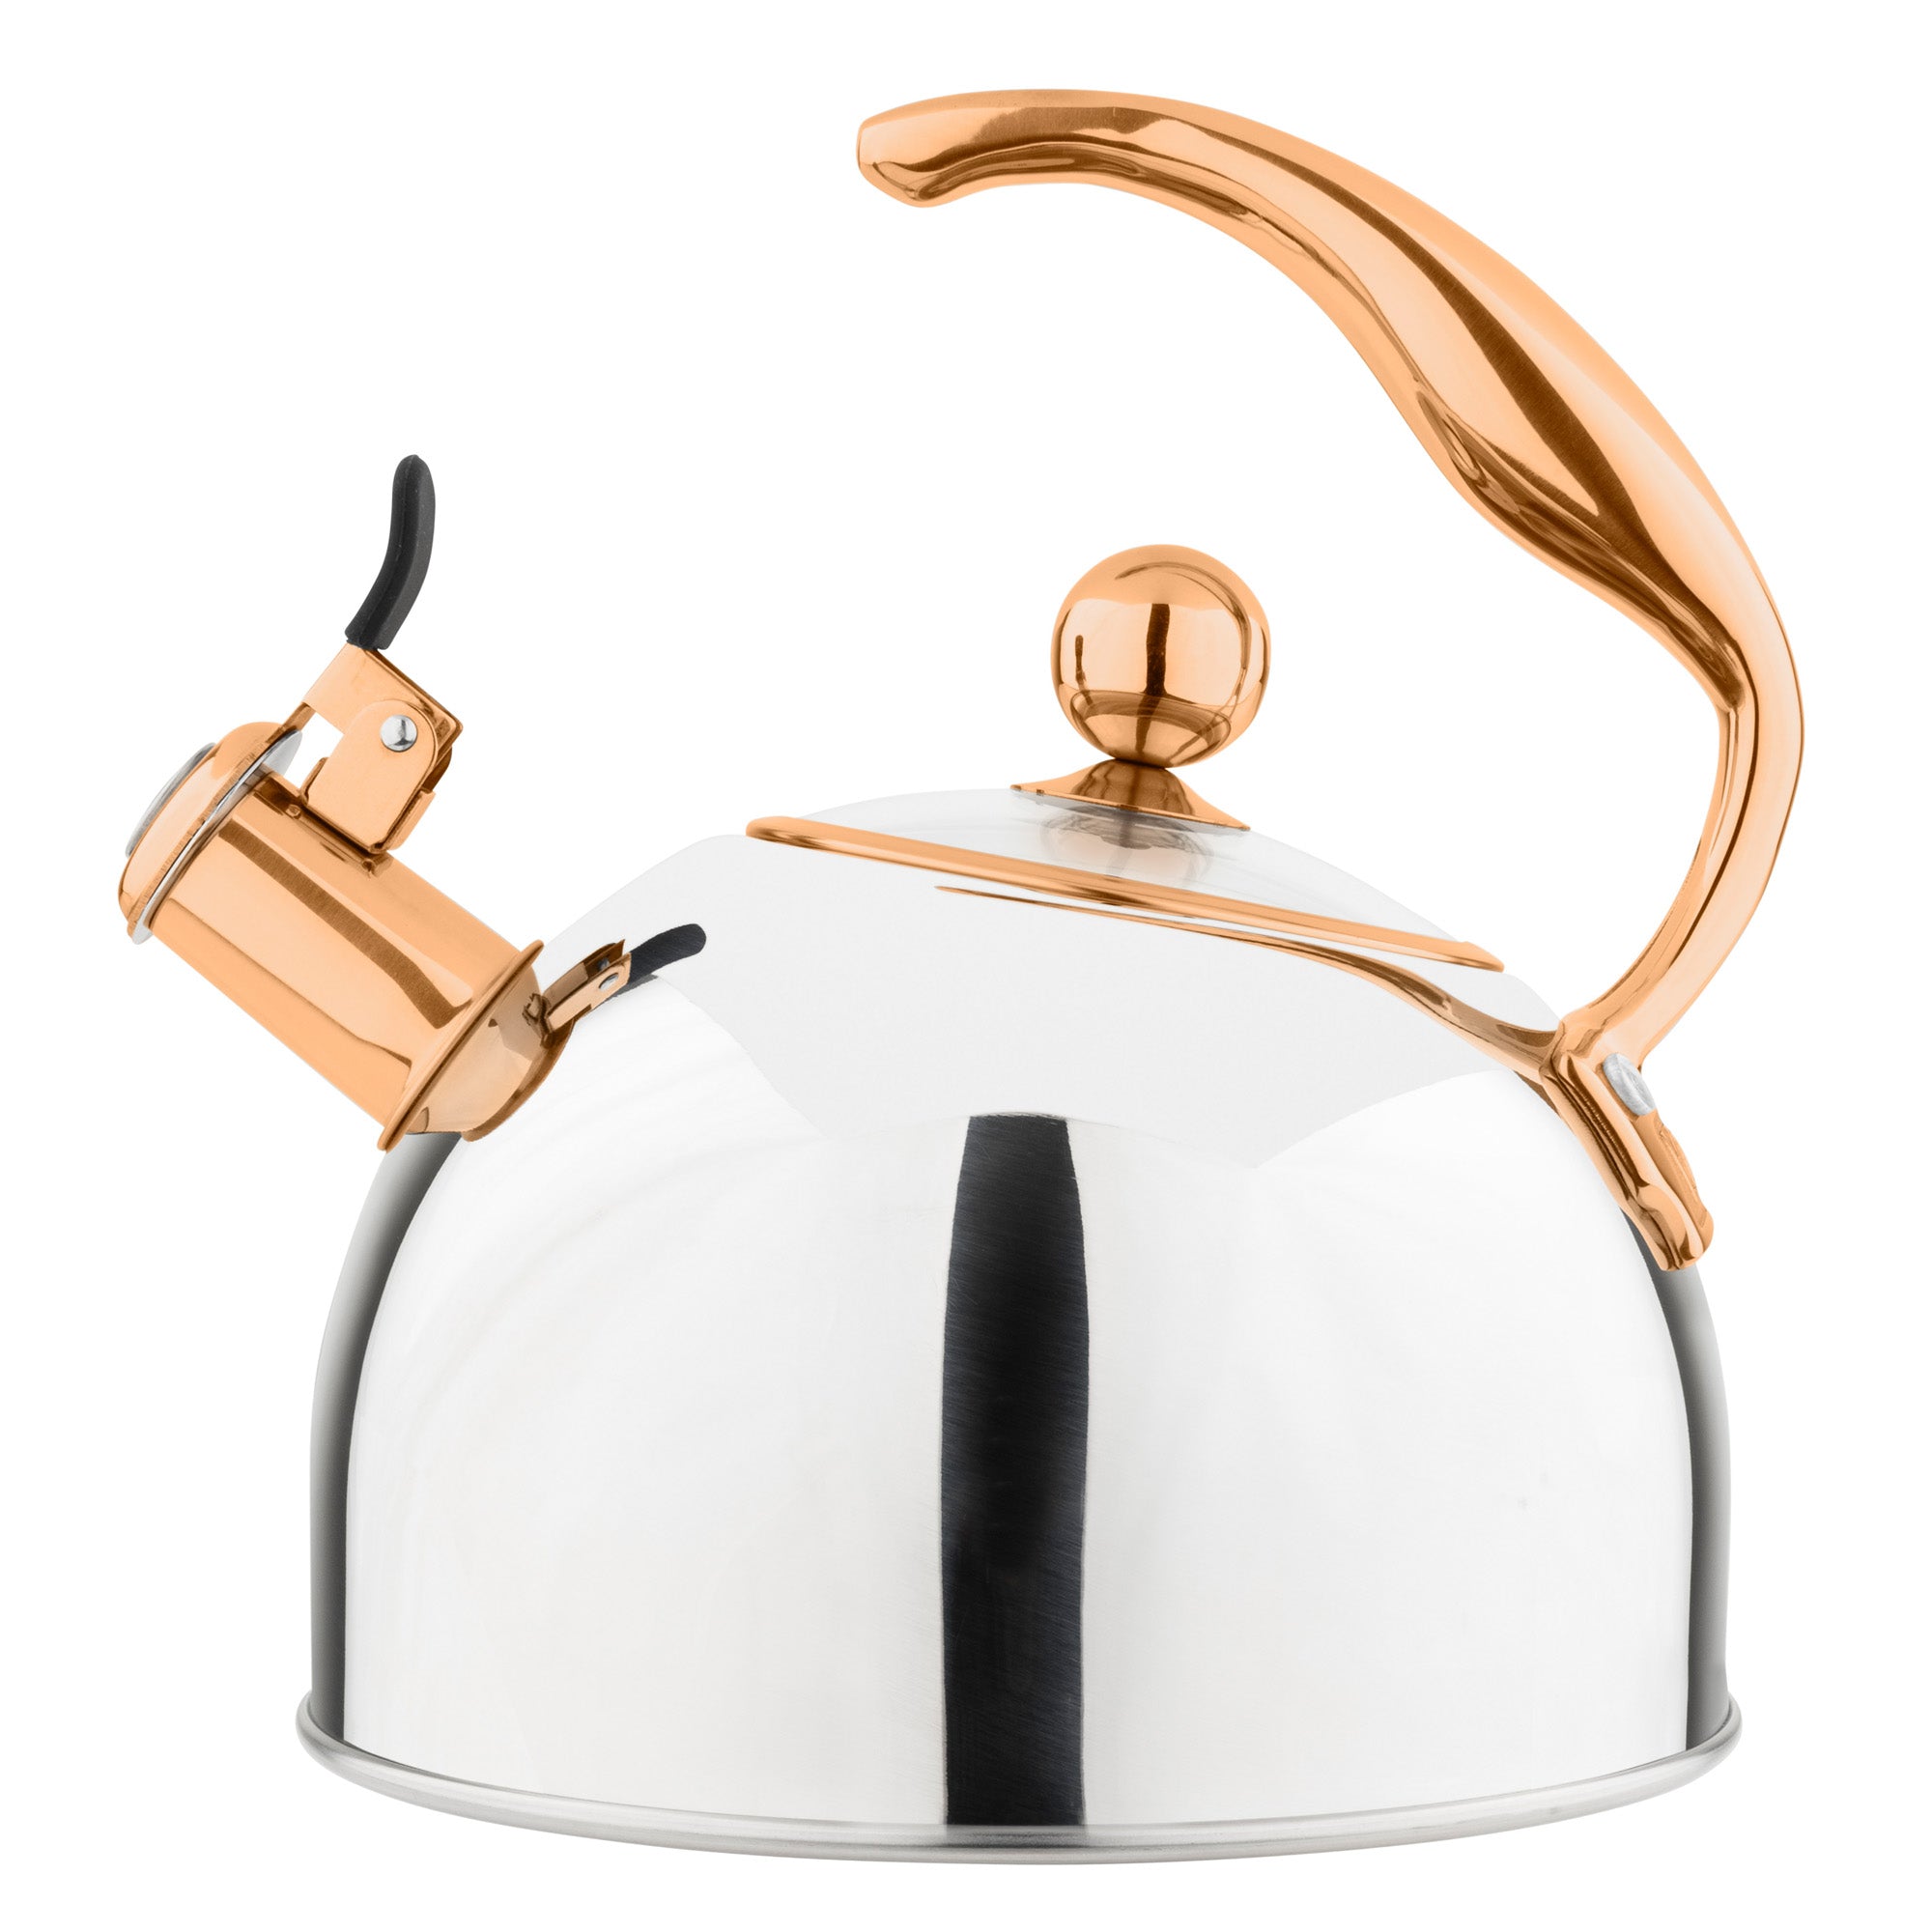 Viking 2.6-Quart Stainless Steel and Copper Whistling Kettle with